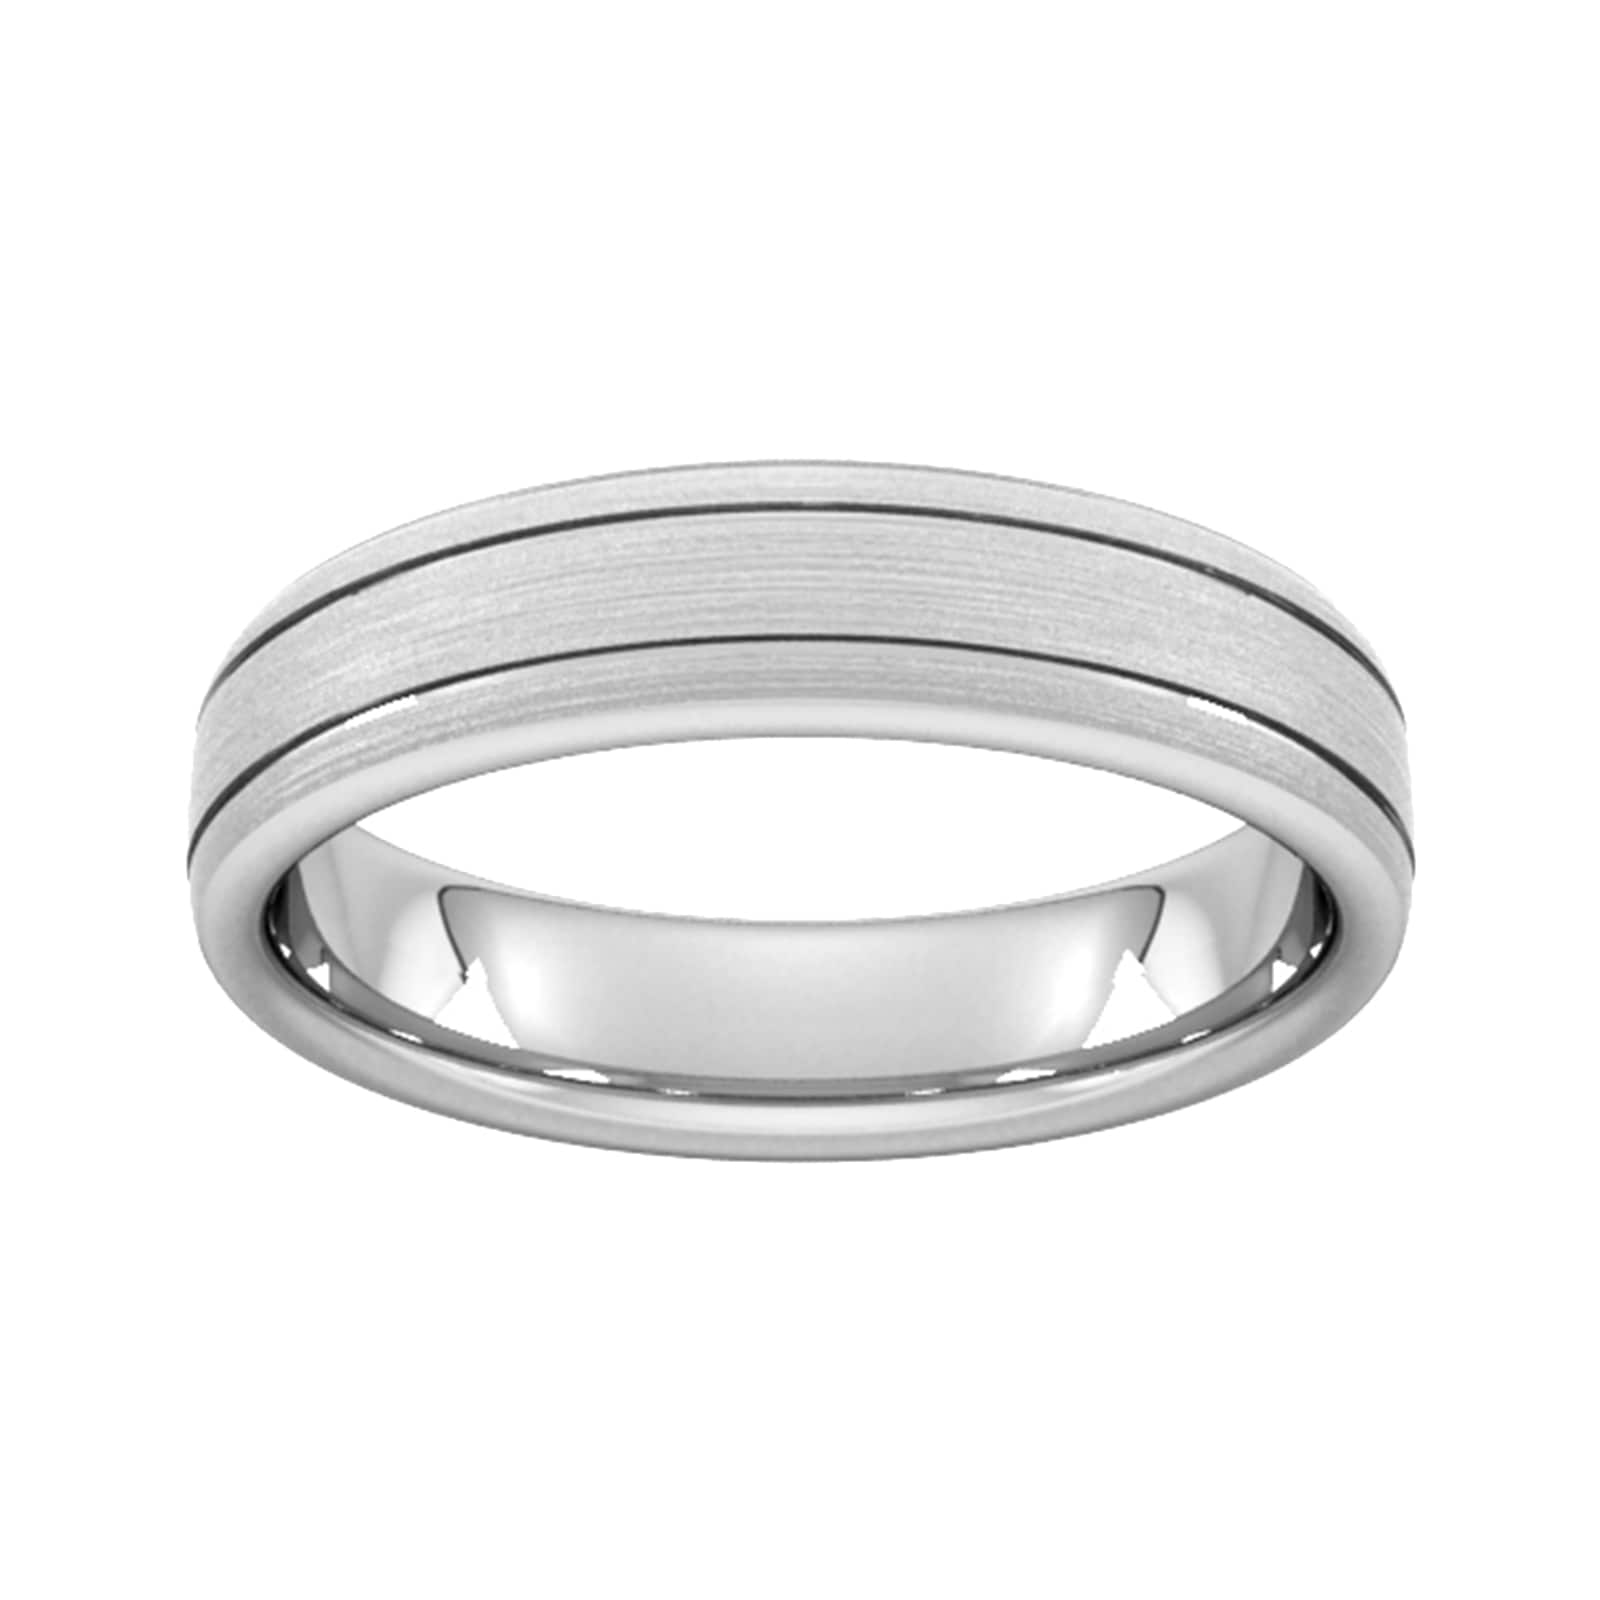 5mm Flat Court Heavy Matt Finish With Double Grooves Wedding Ring In 950 Palladium - Ring Size H